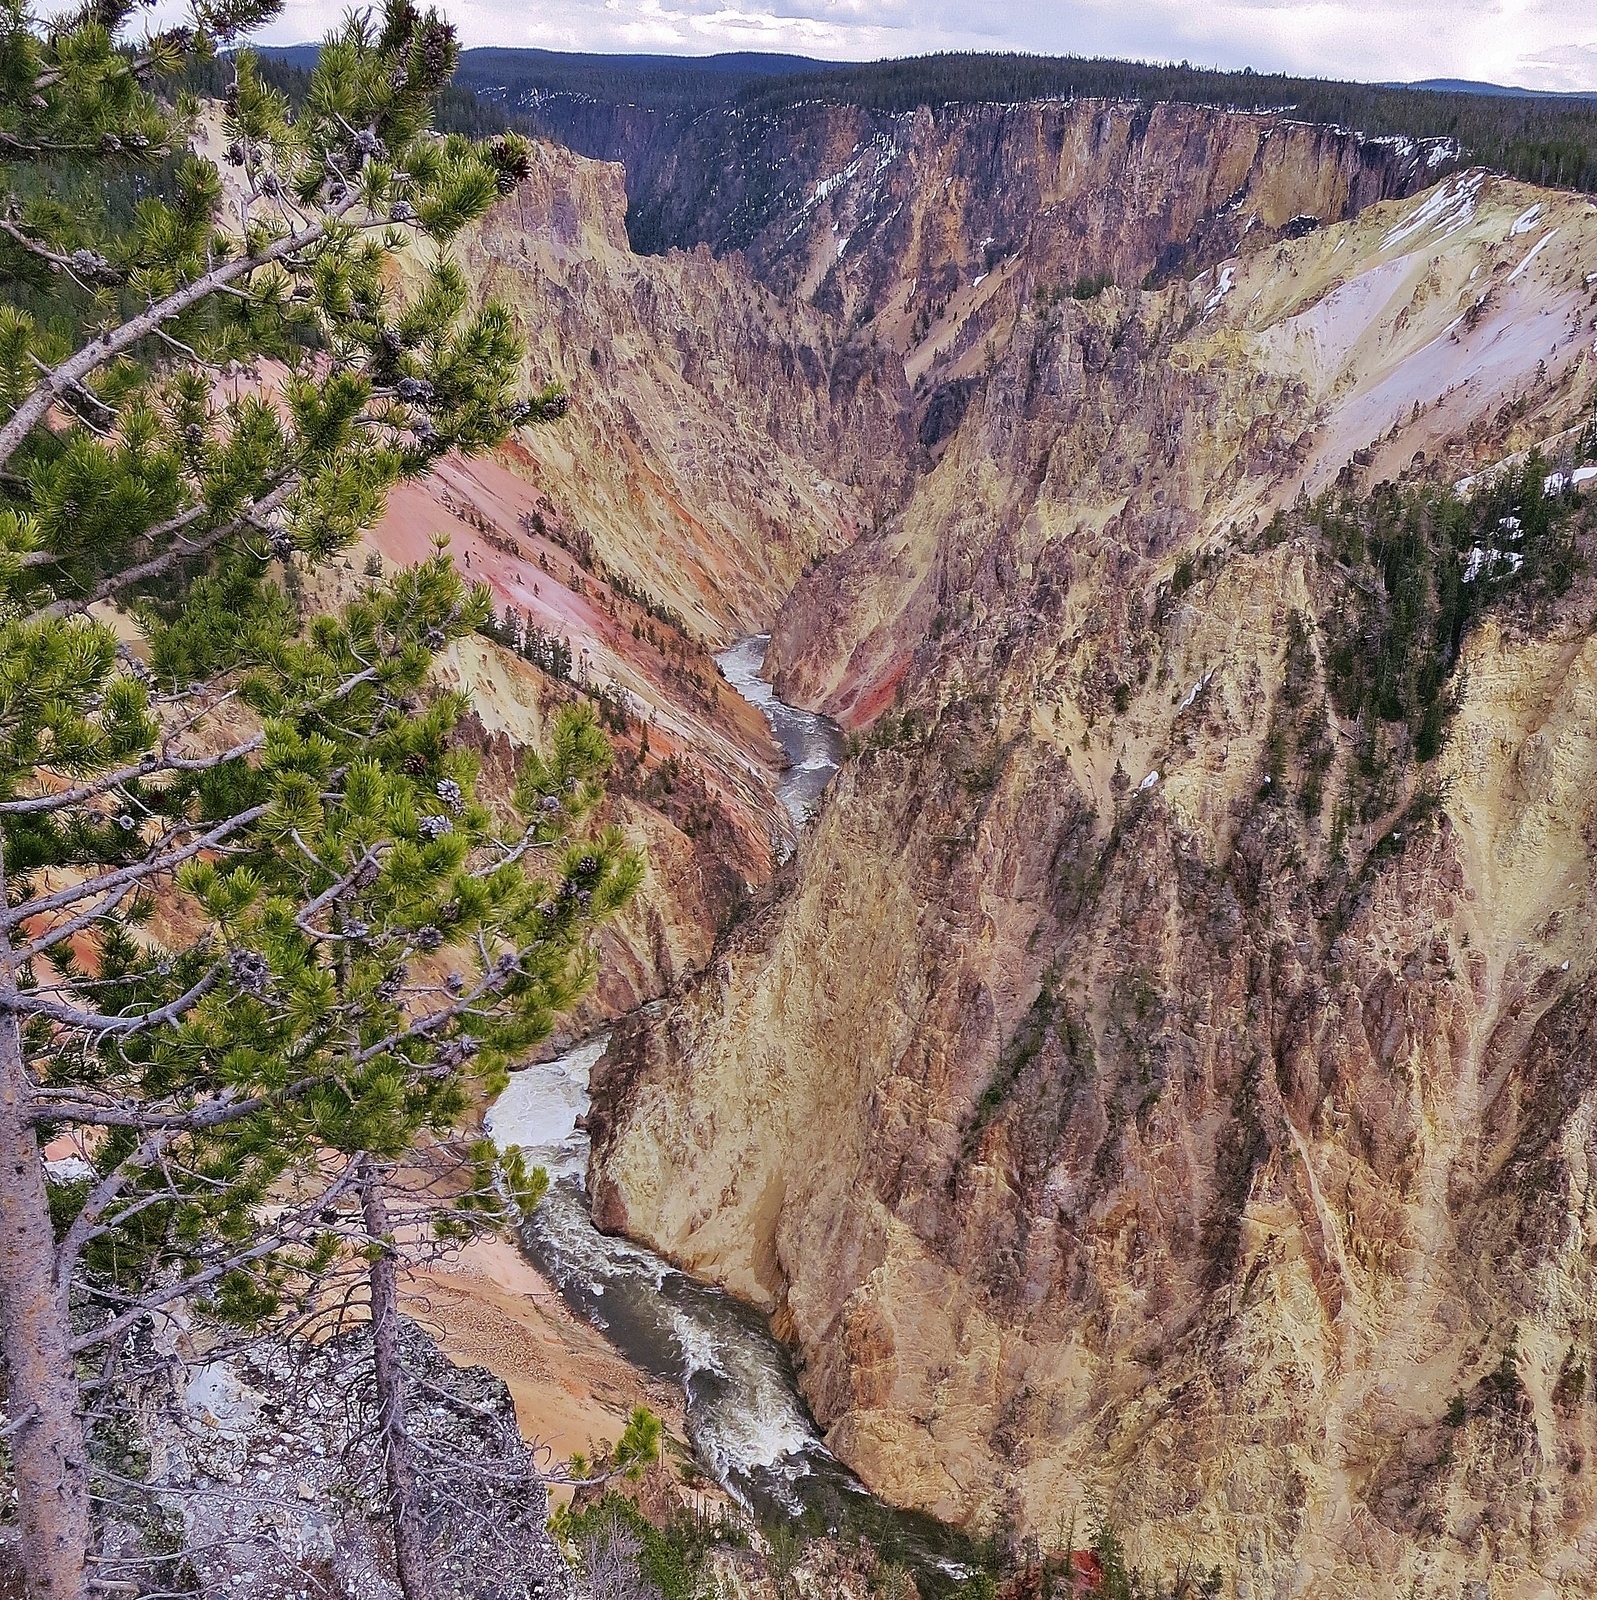 The Grand Canyon of the Yellowstone - Yellowstone National Park, Wyoming